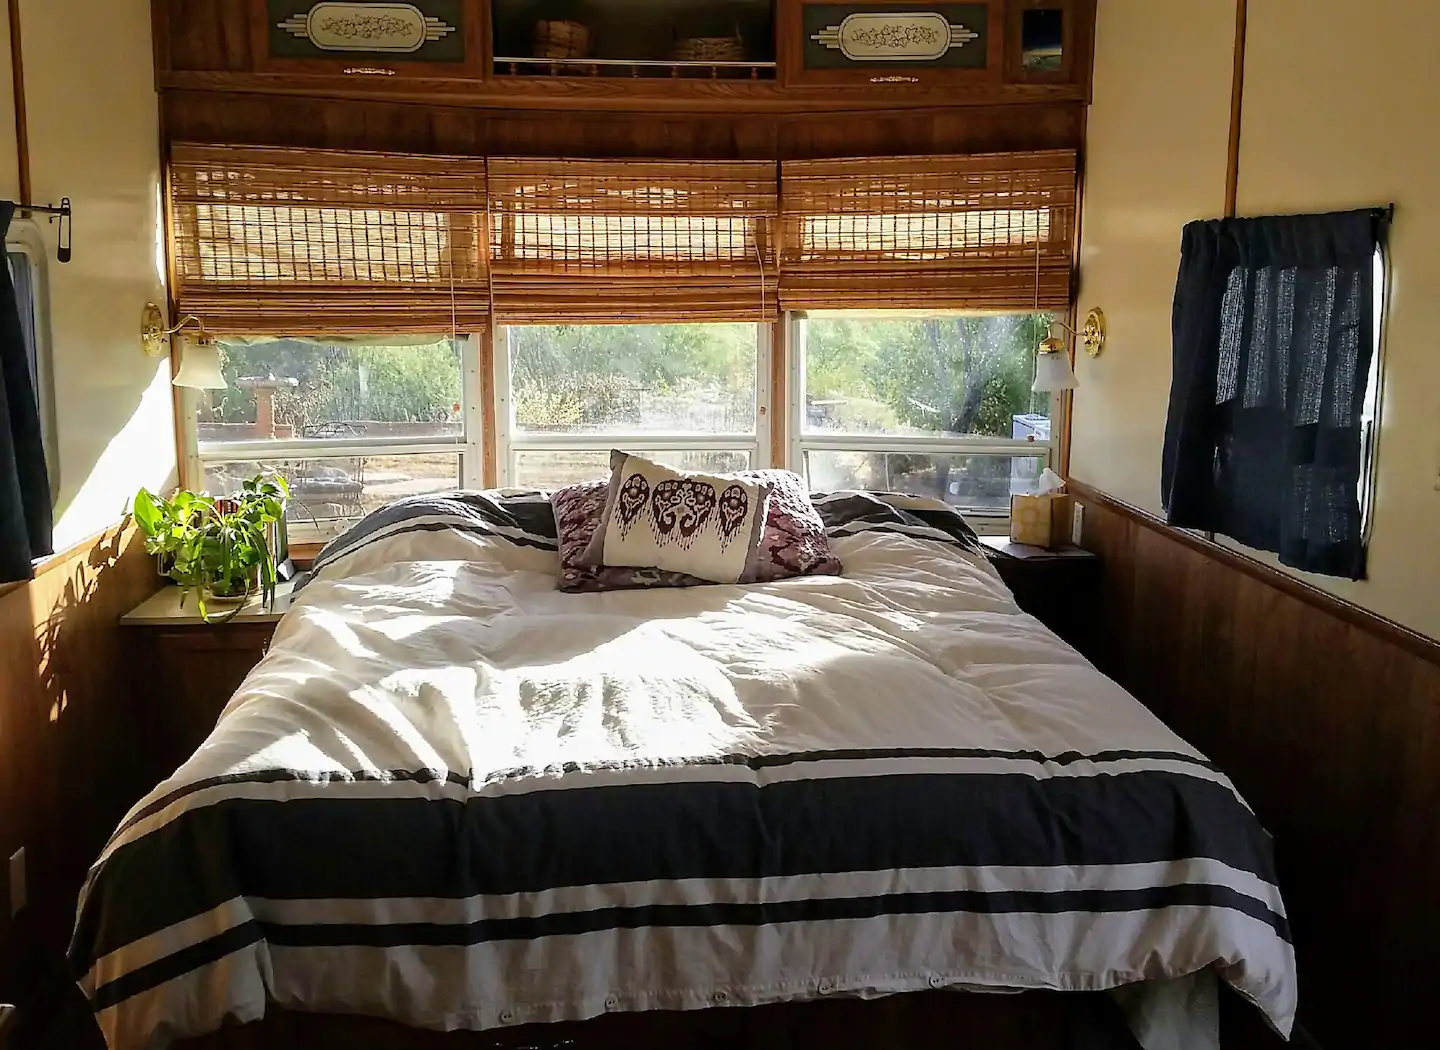 Bed in RV tucson airbnb